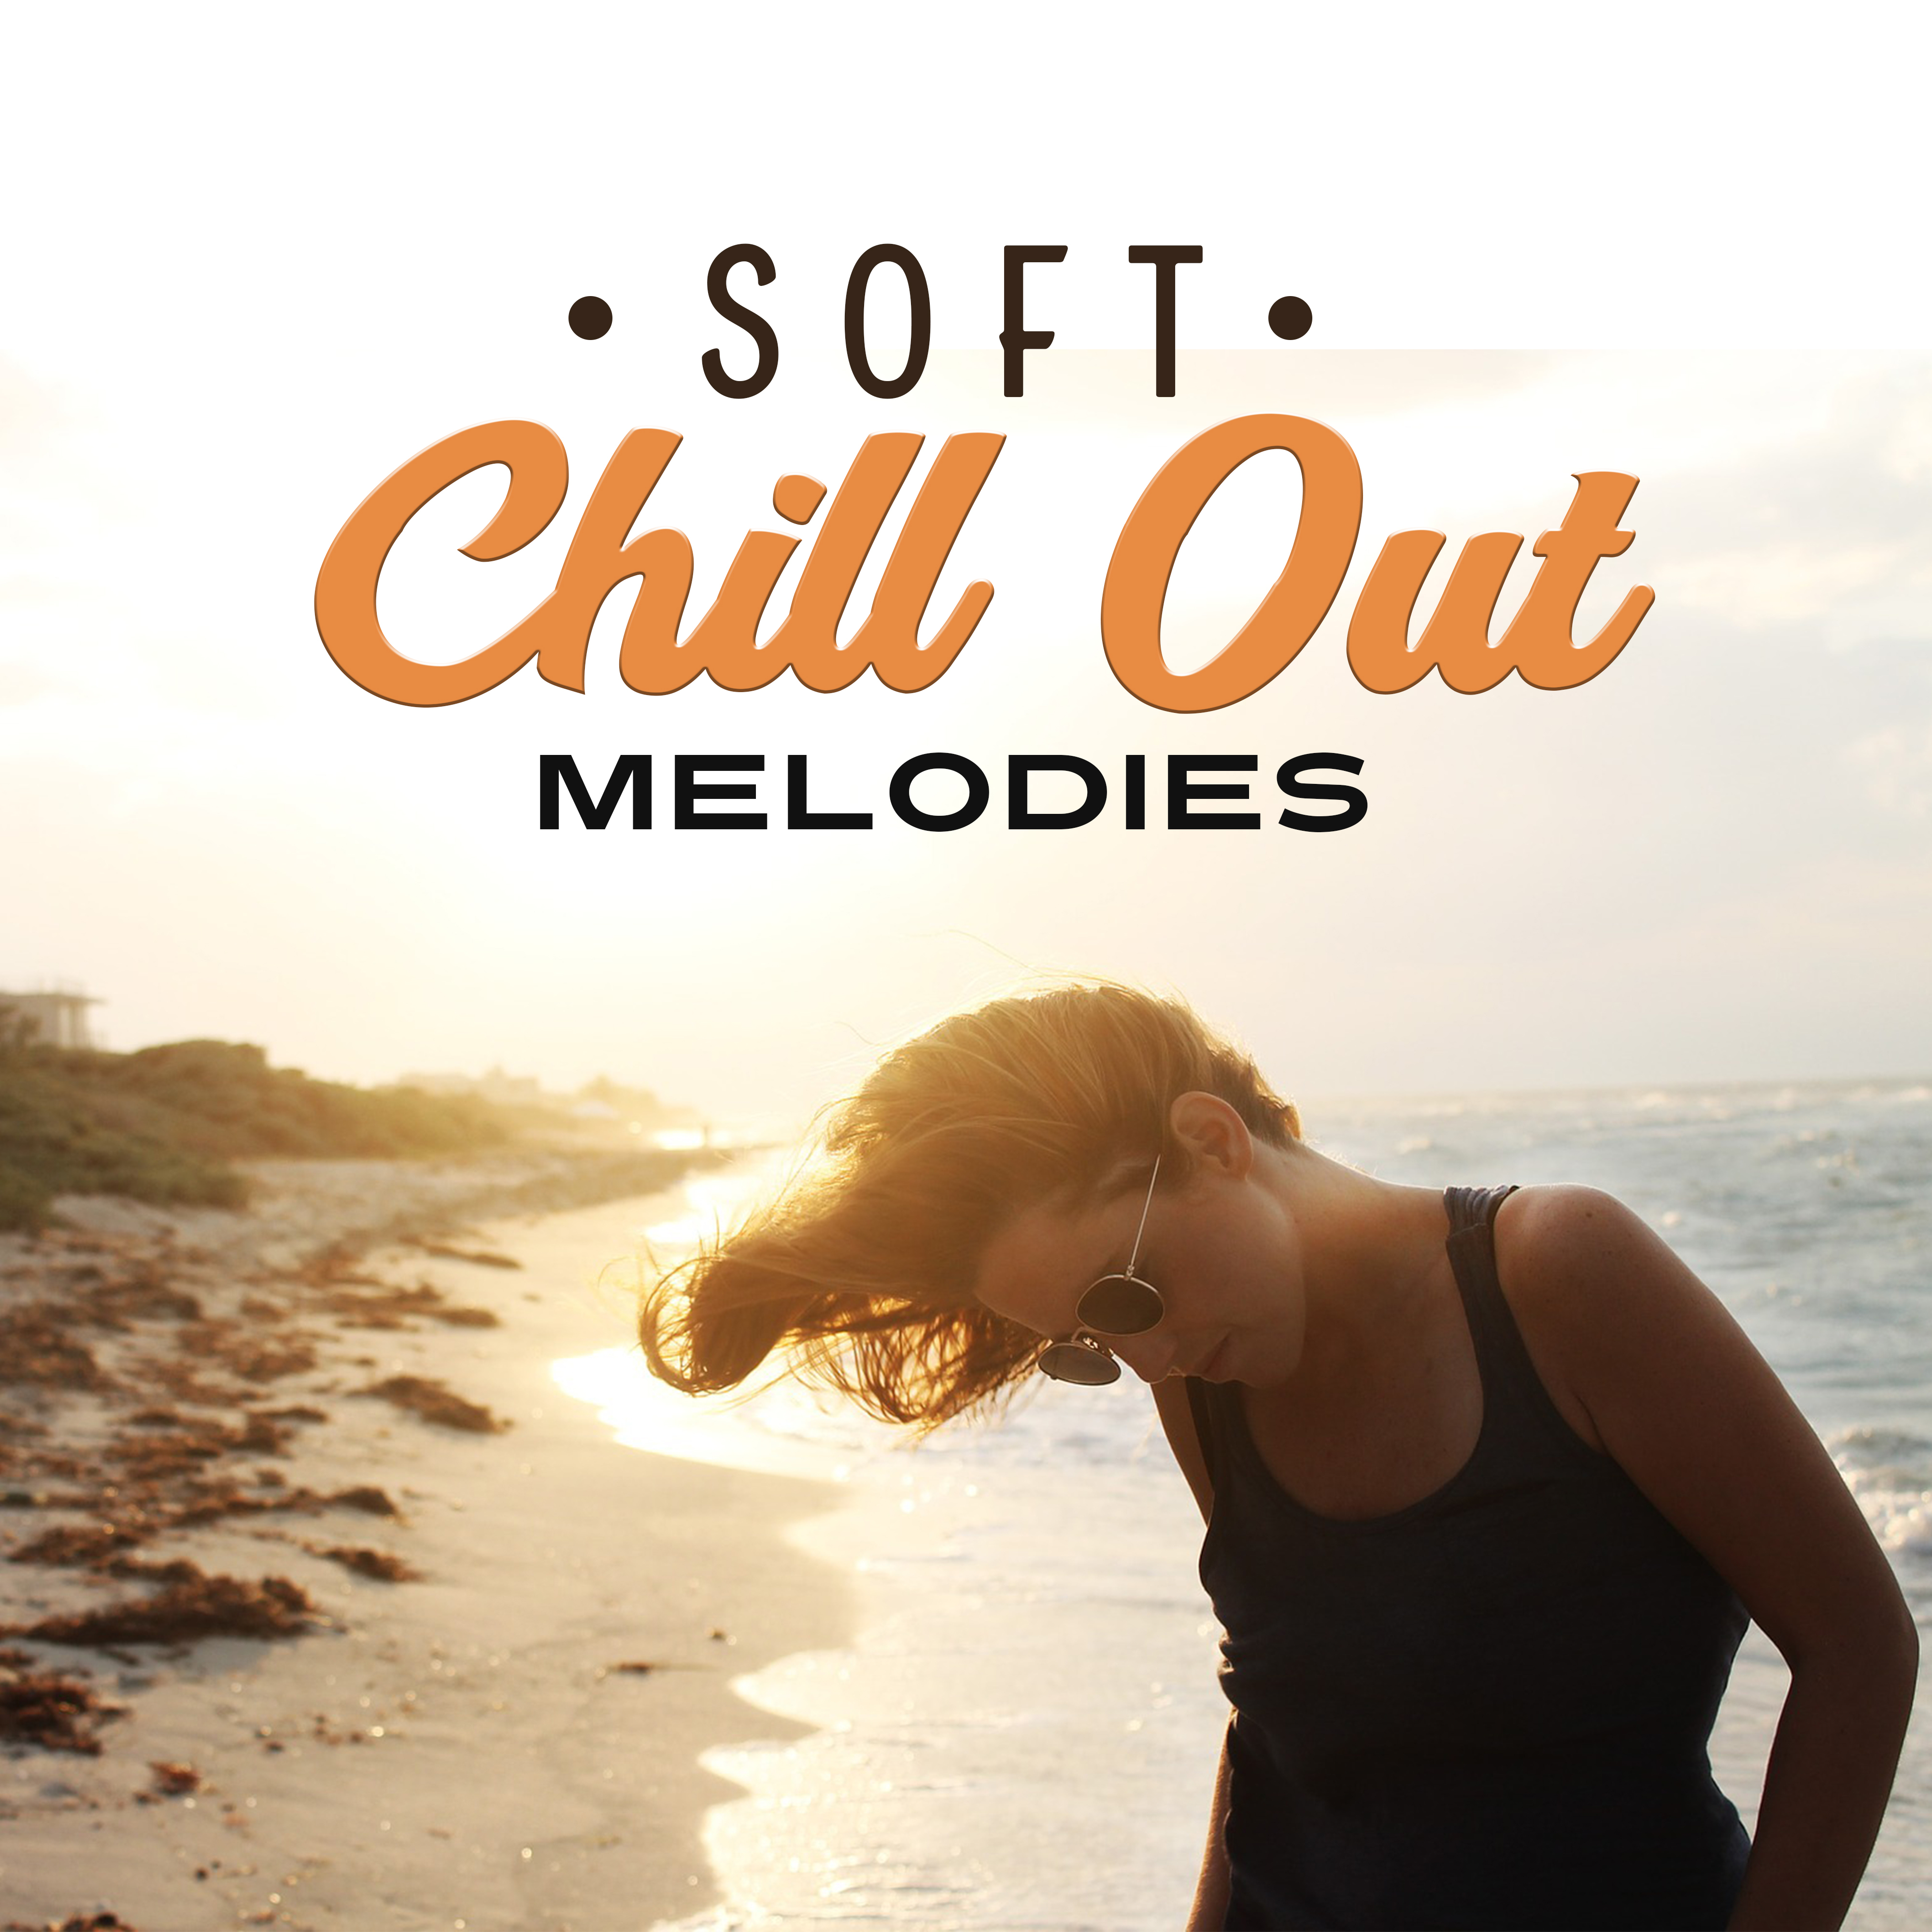 Soft Chill Out Melodies – Relaxing Time, Summer Beats, Chill Out 2017, Beach Rest